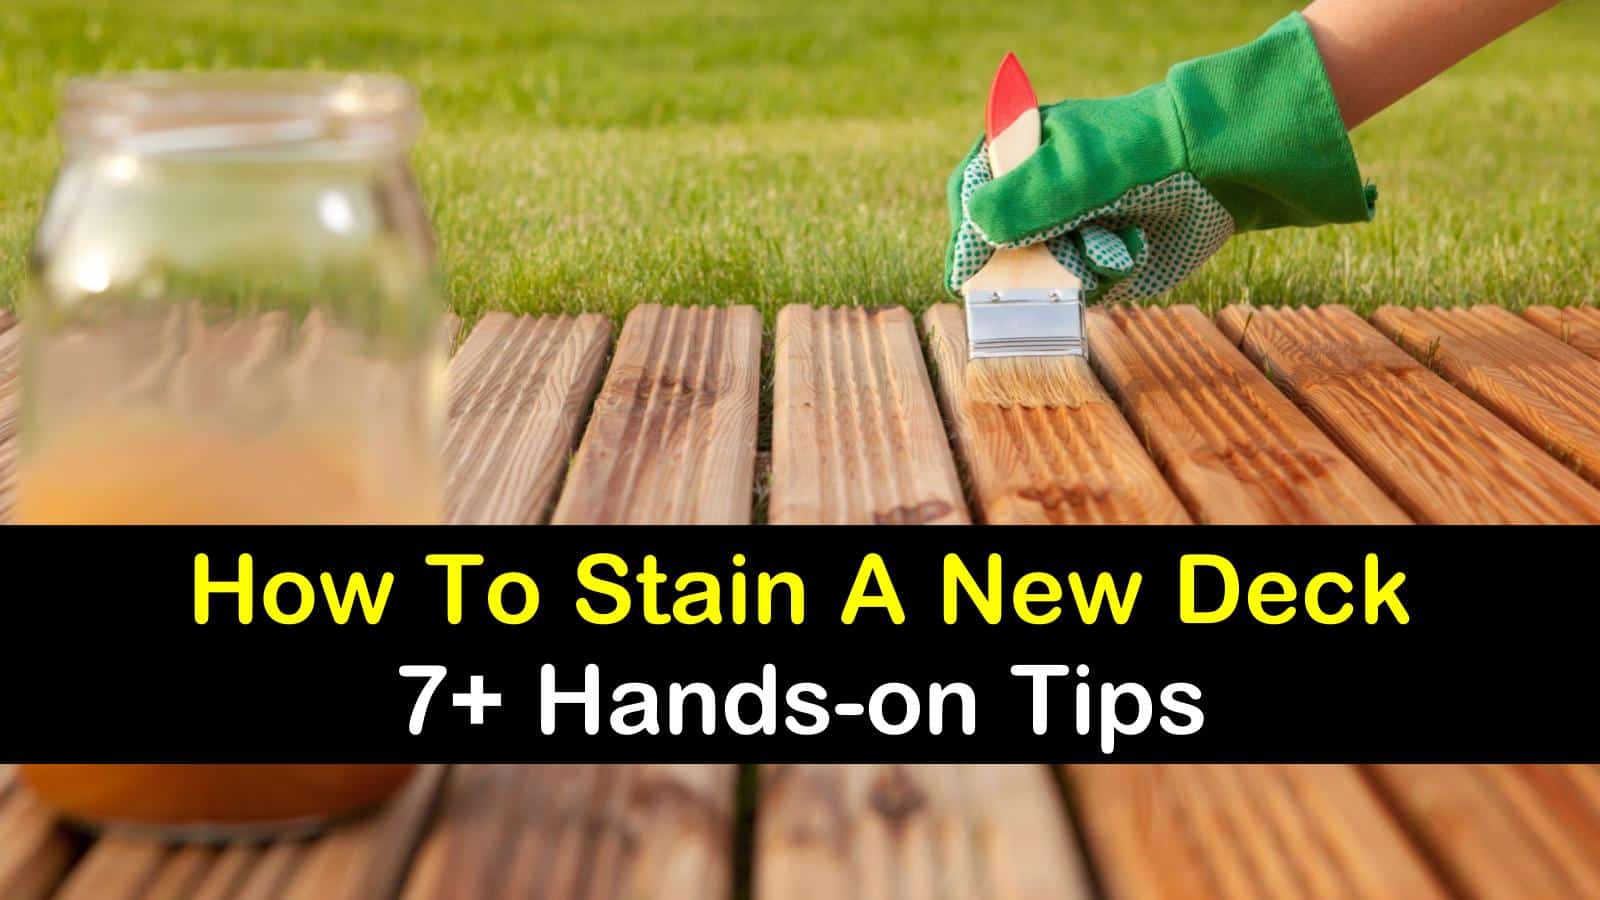 how to stain a new deck titleimg1